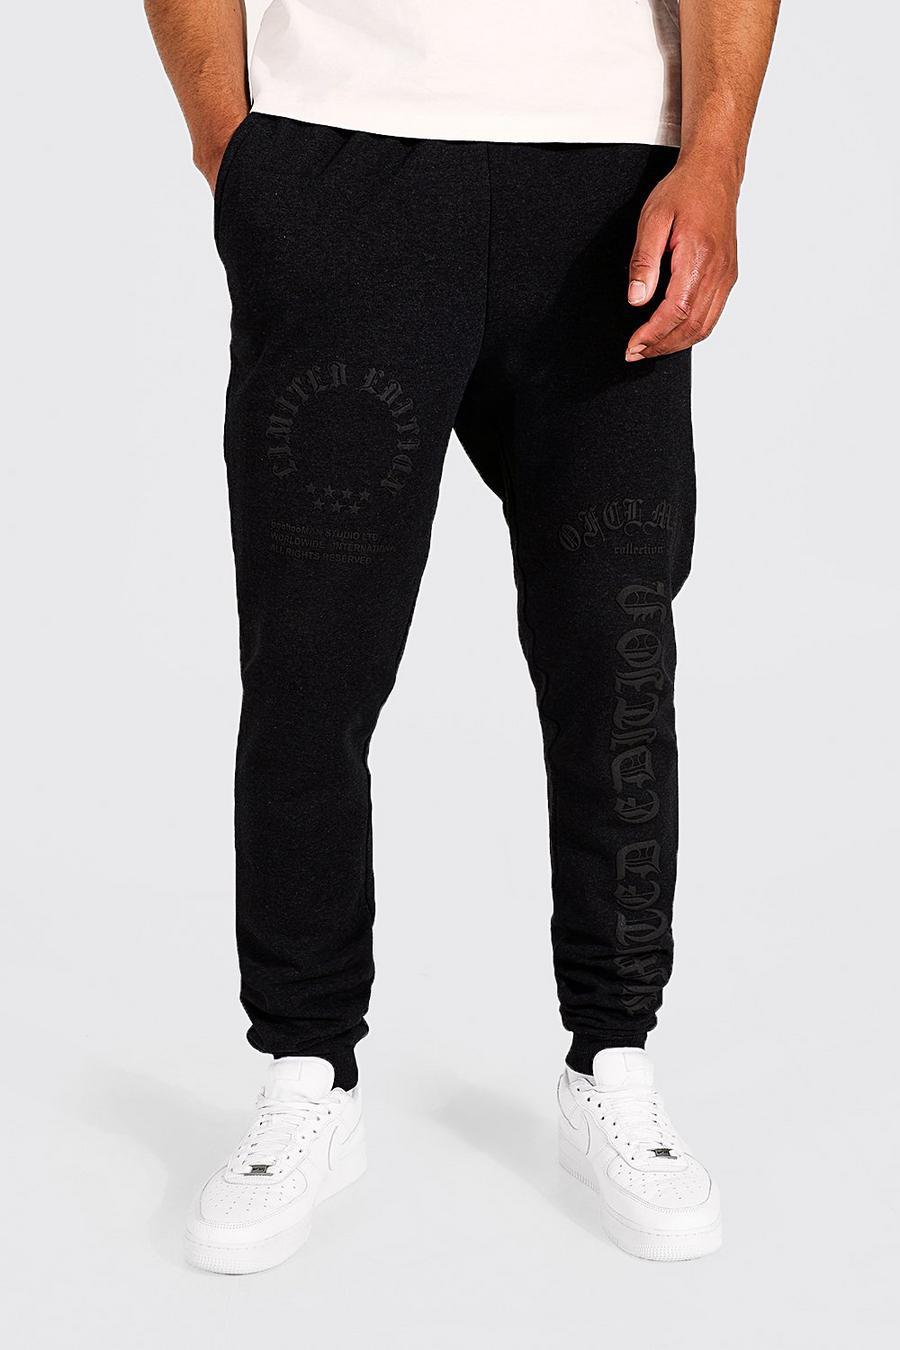 Charcoal gris Tall Limited Edition Joggingbroek image number 1